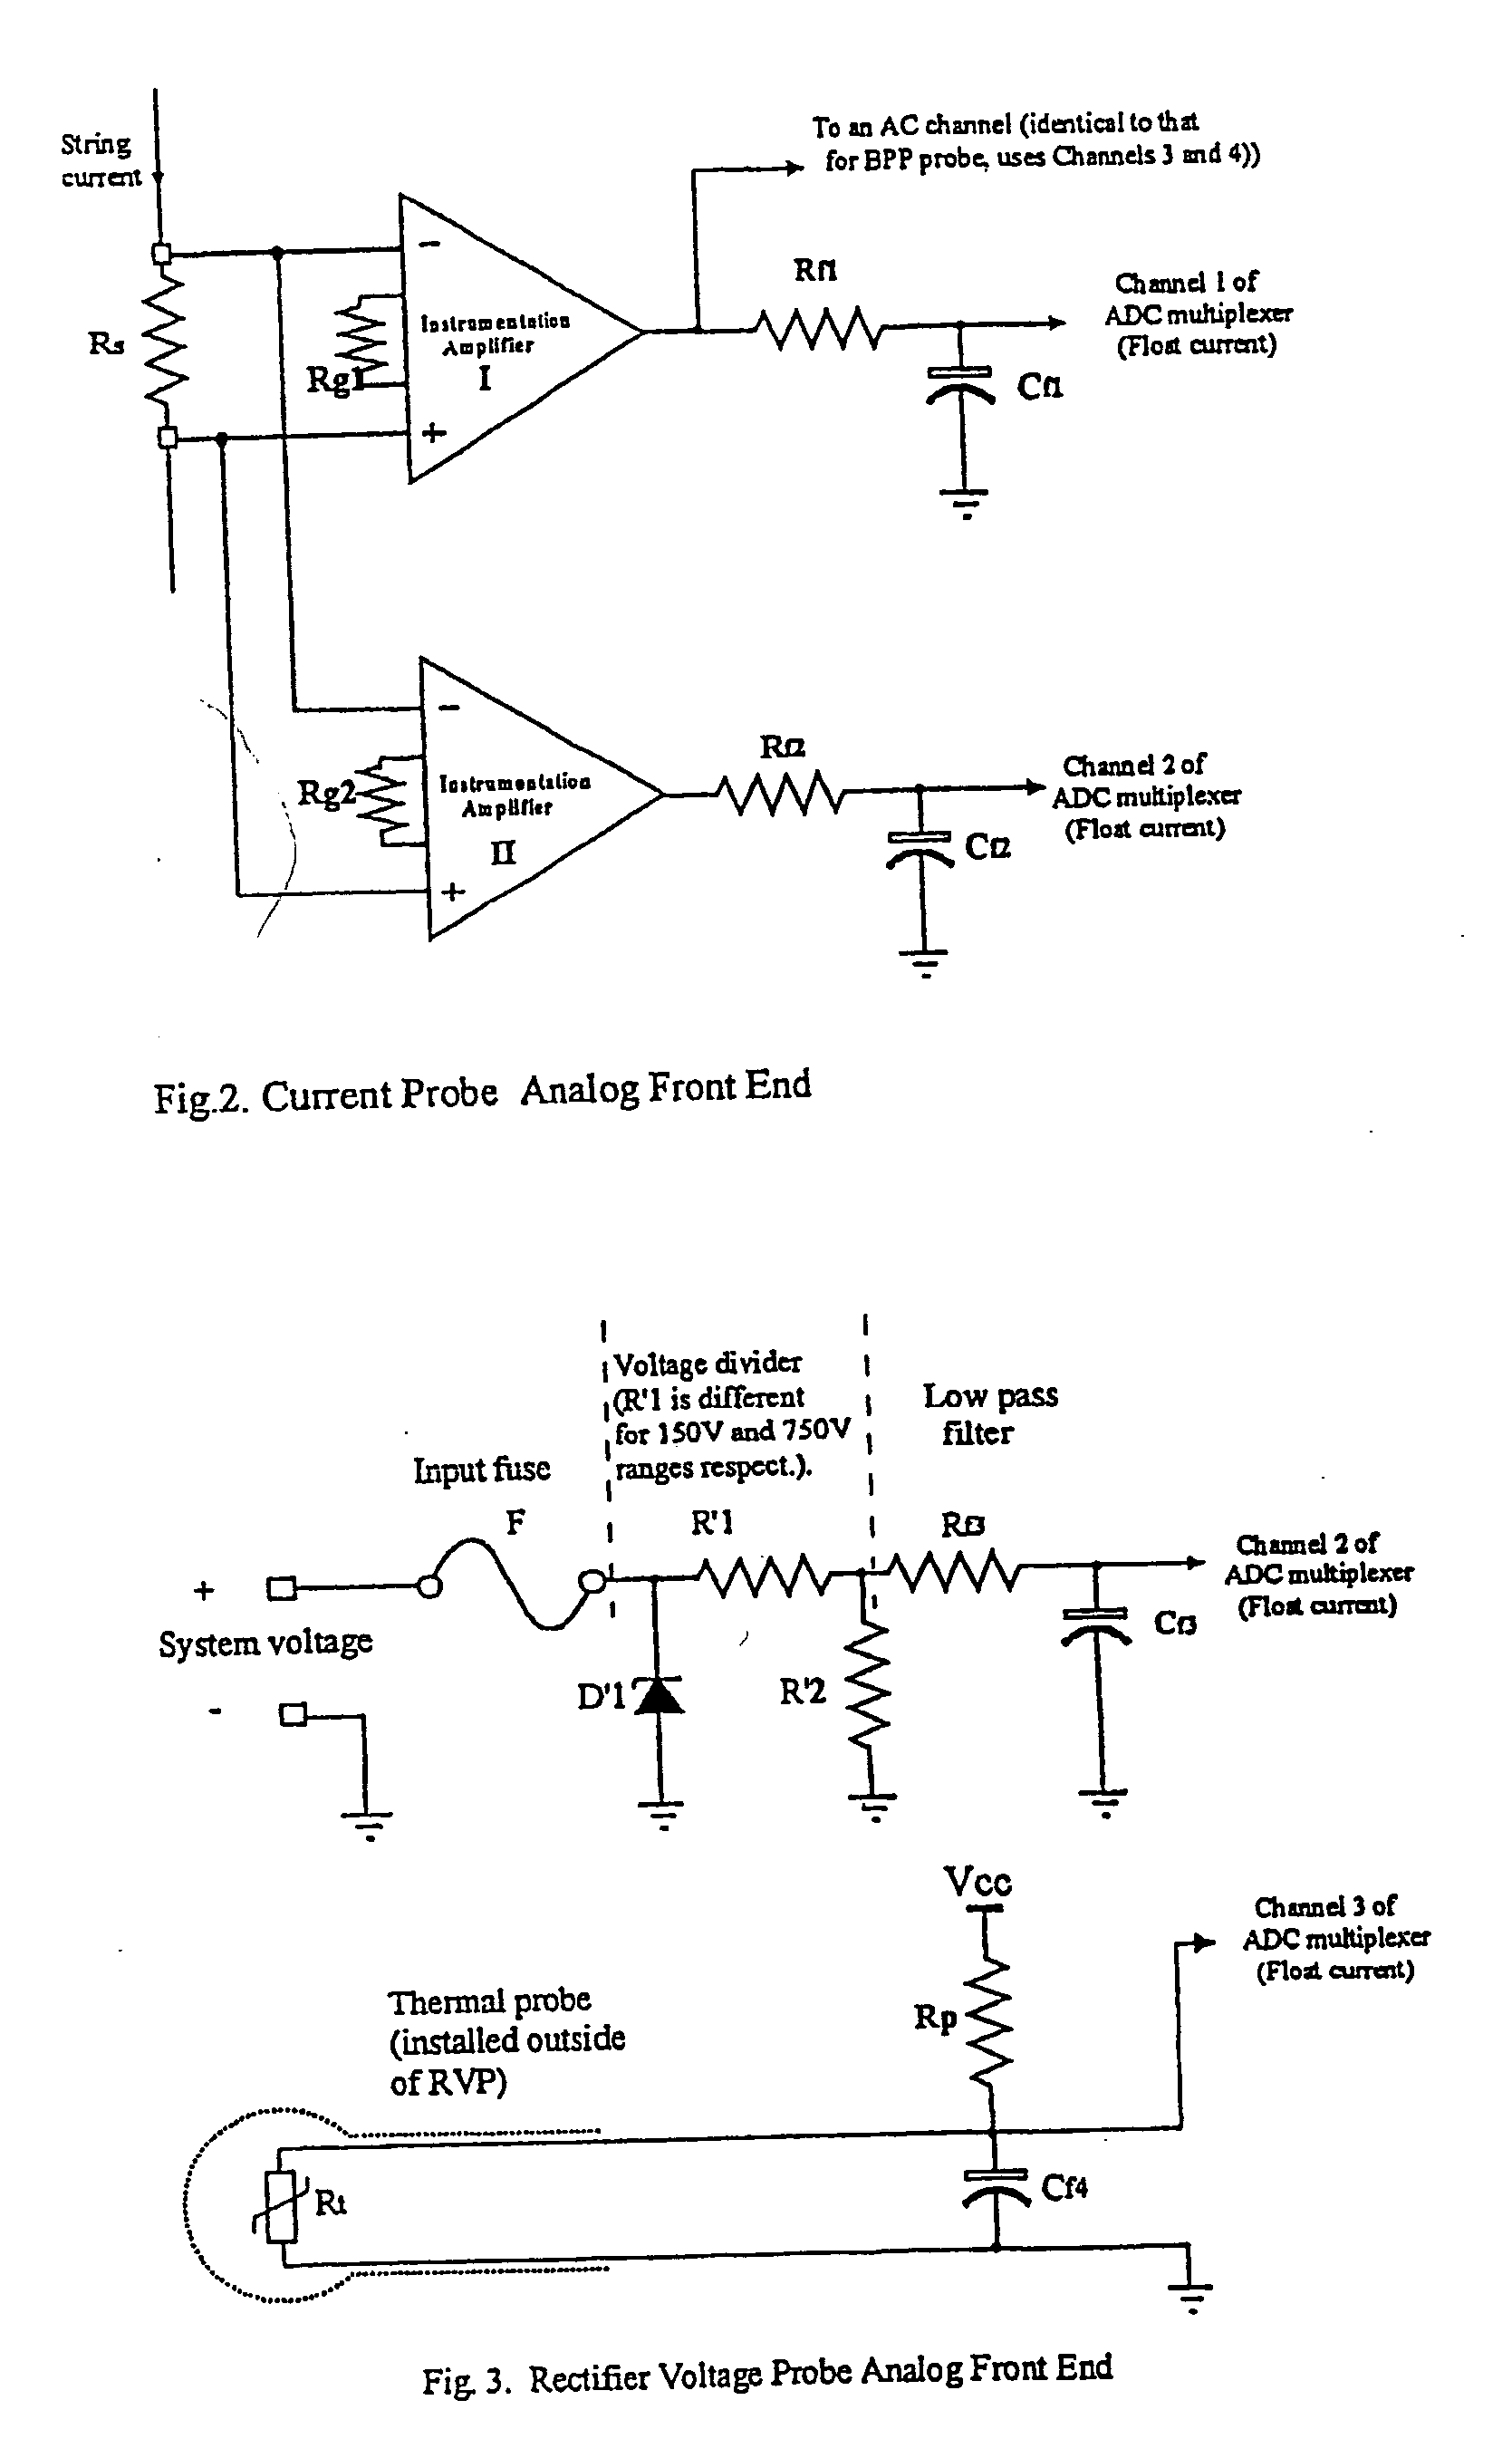 Method and apparatus for the continuous performance monitoring of a lead acid battery system